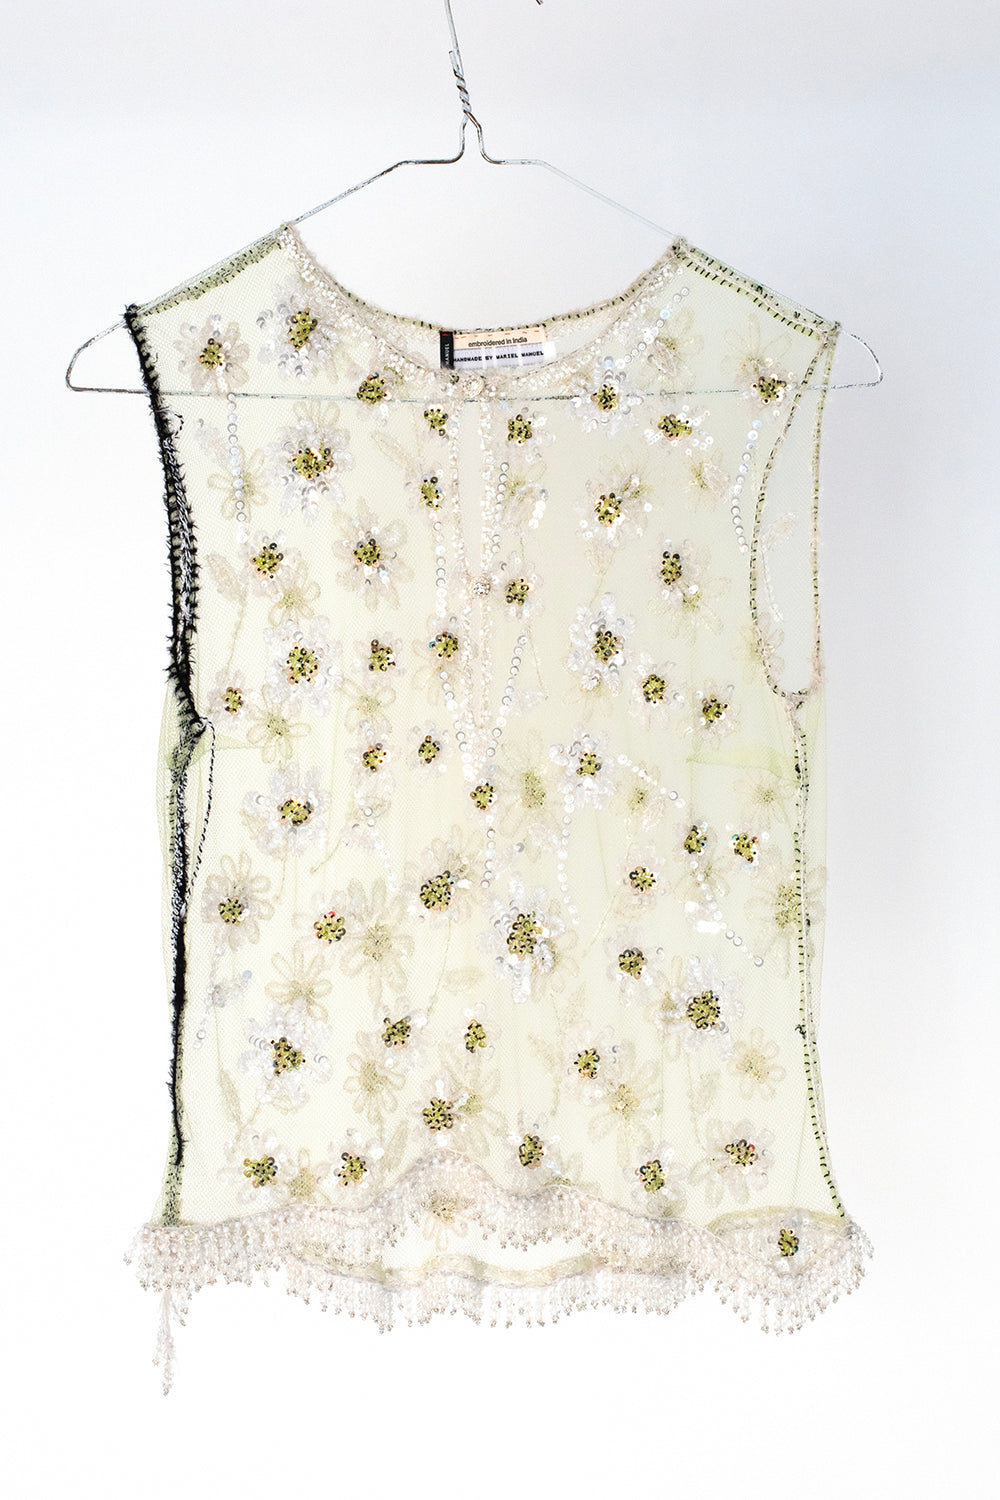 Daisy sequin jewel embroidered craft top